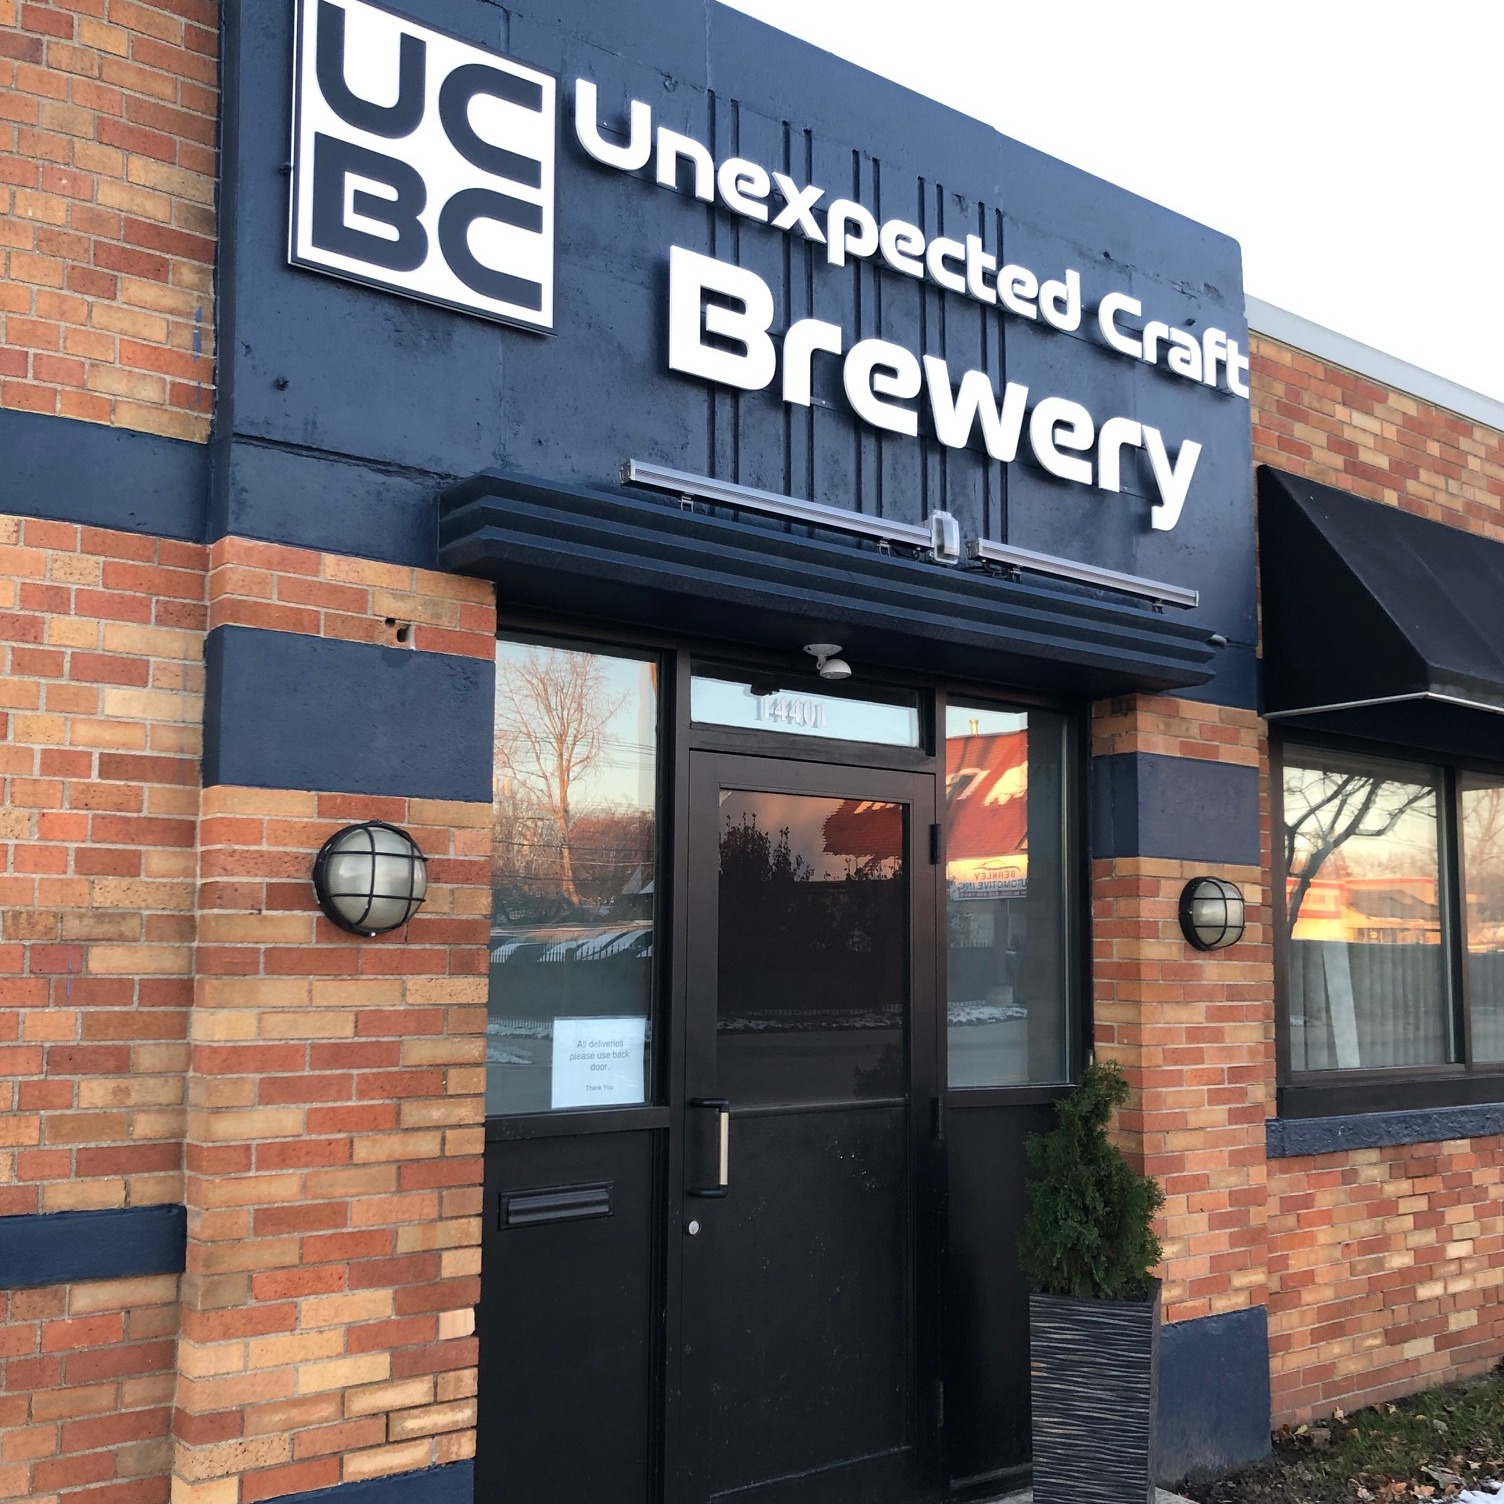 Unexpected Craft Brewing Company